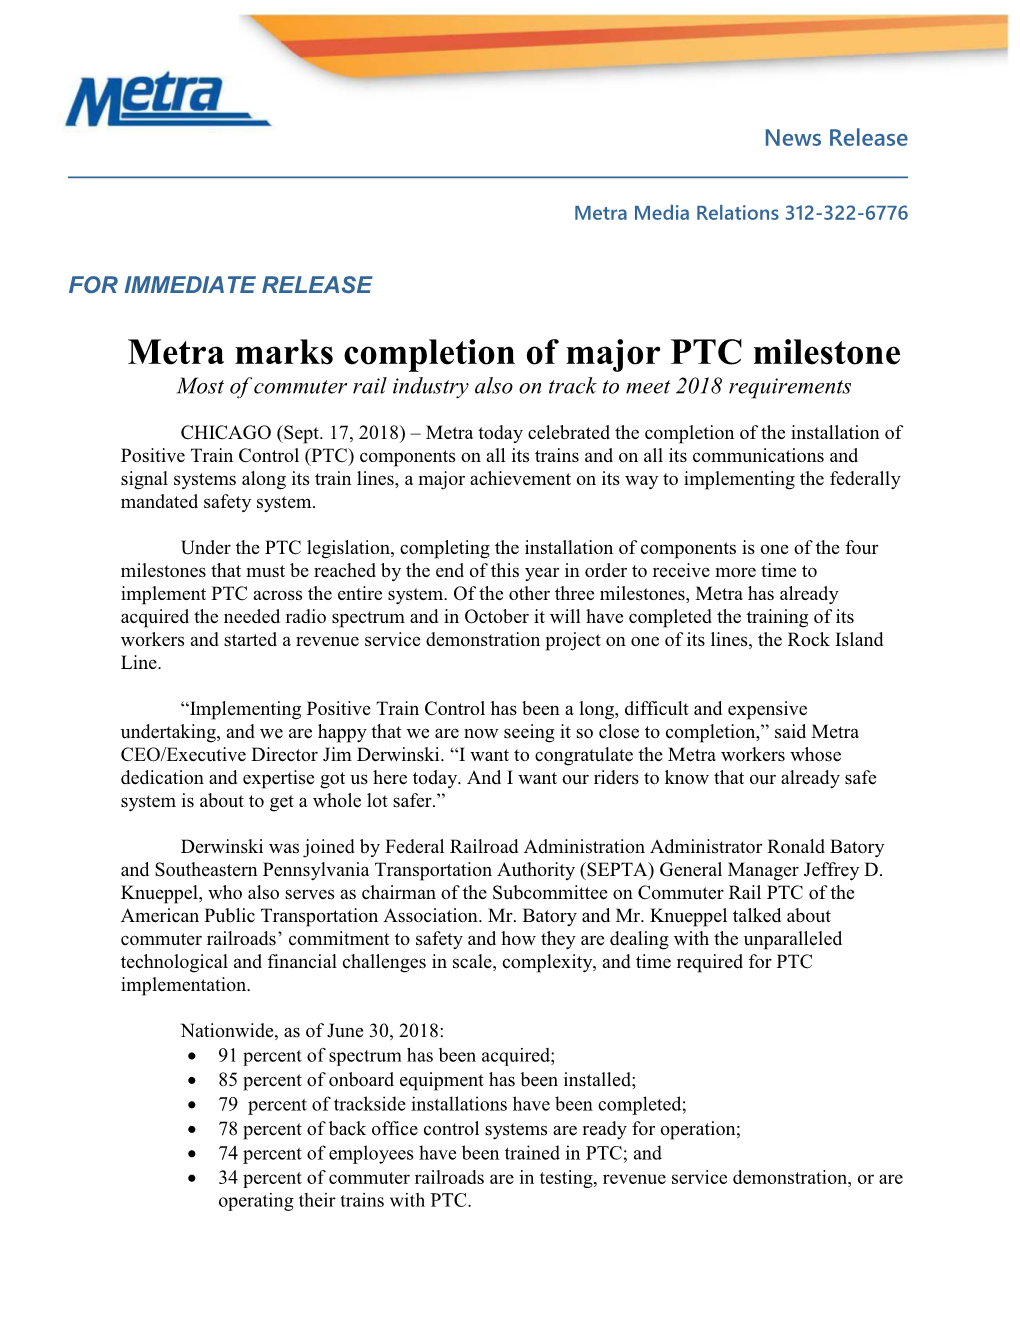 Metra Marks Completion of Major PTC Milestone Most of Commuter Rail Industry Also on Track to Meet 2018 Requirements